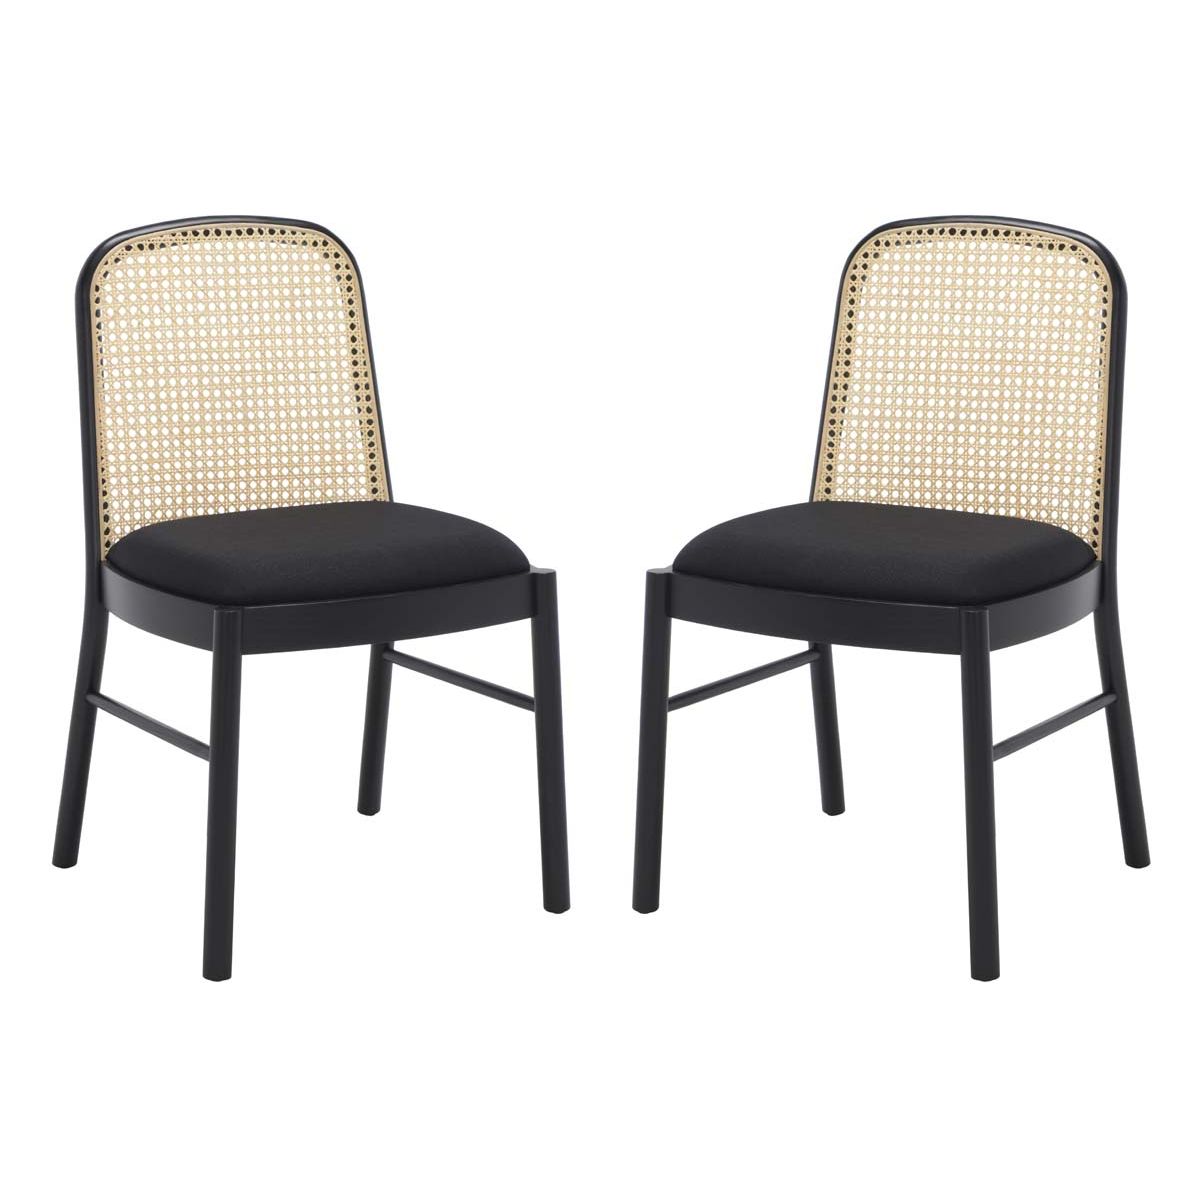 Safavieh Couture Annmarie Rattan Back Chair(Set of 2)